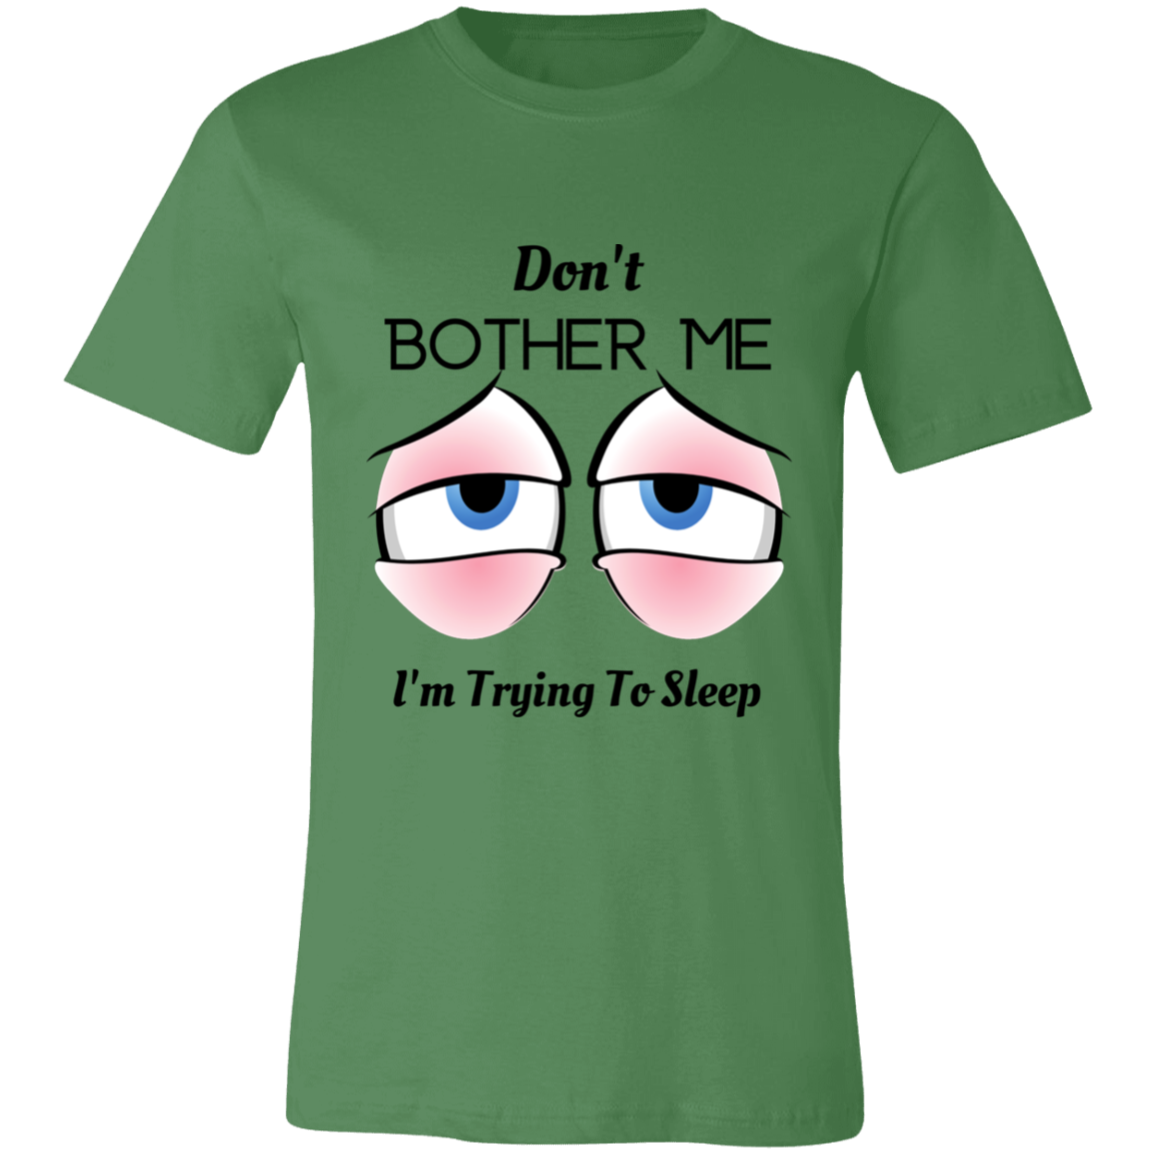 Don't Bother Me I'm Trying To Sleep Unisex Jersey Short-Sleeve T-Shirt, Shirts For Women, Gift For Women, Gift For Her